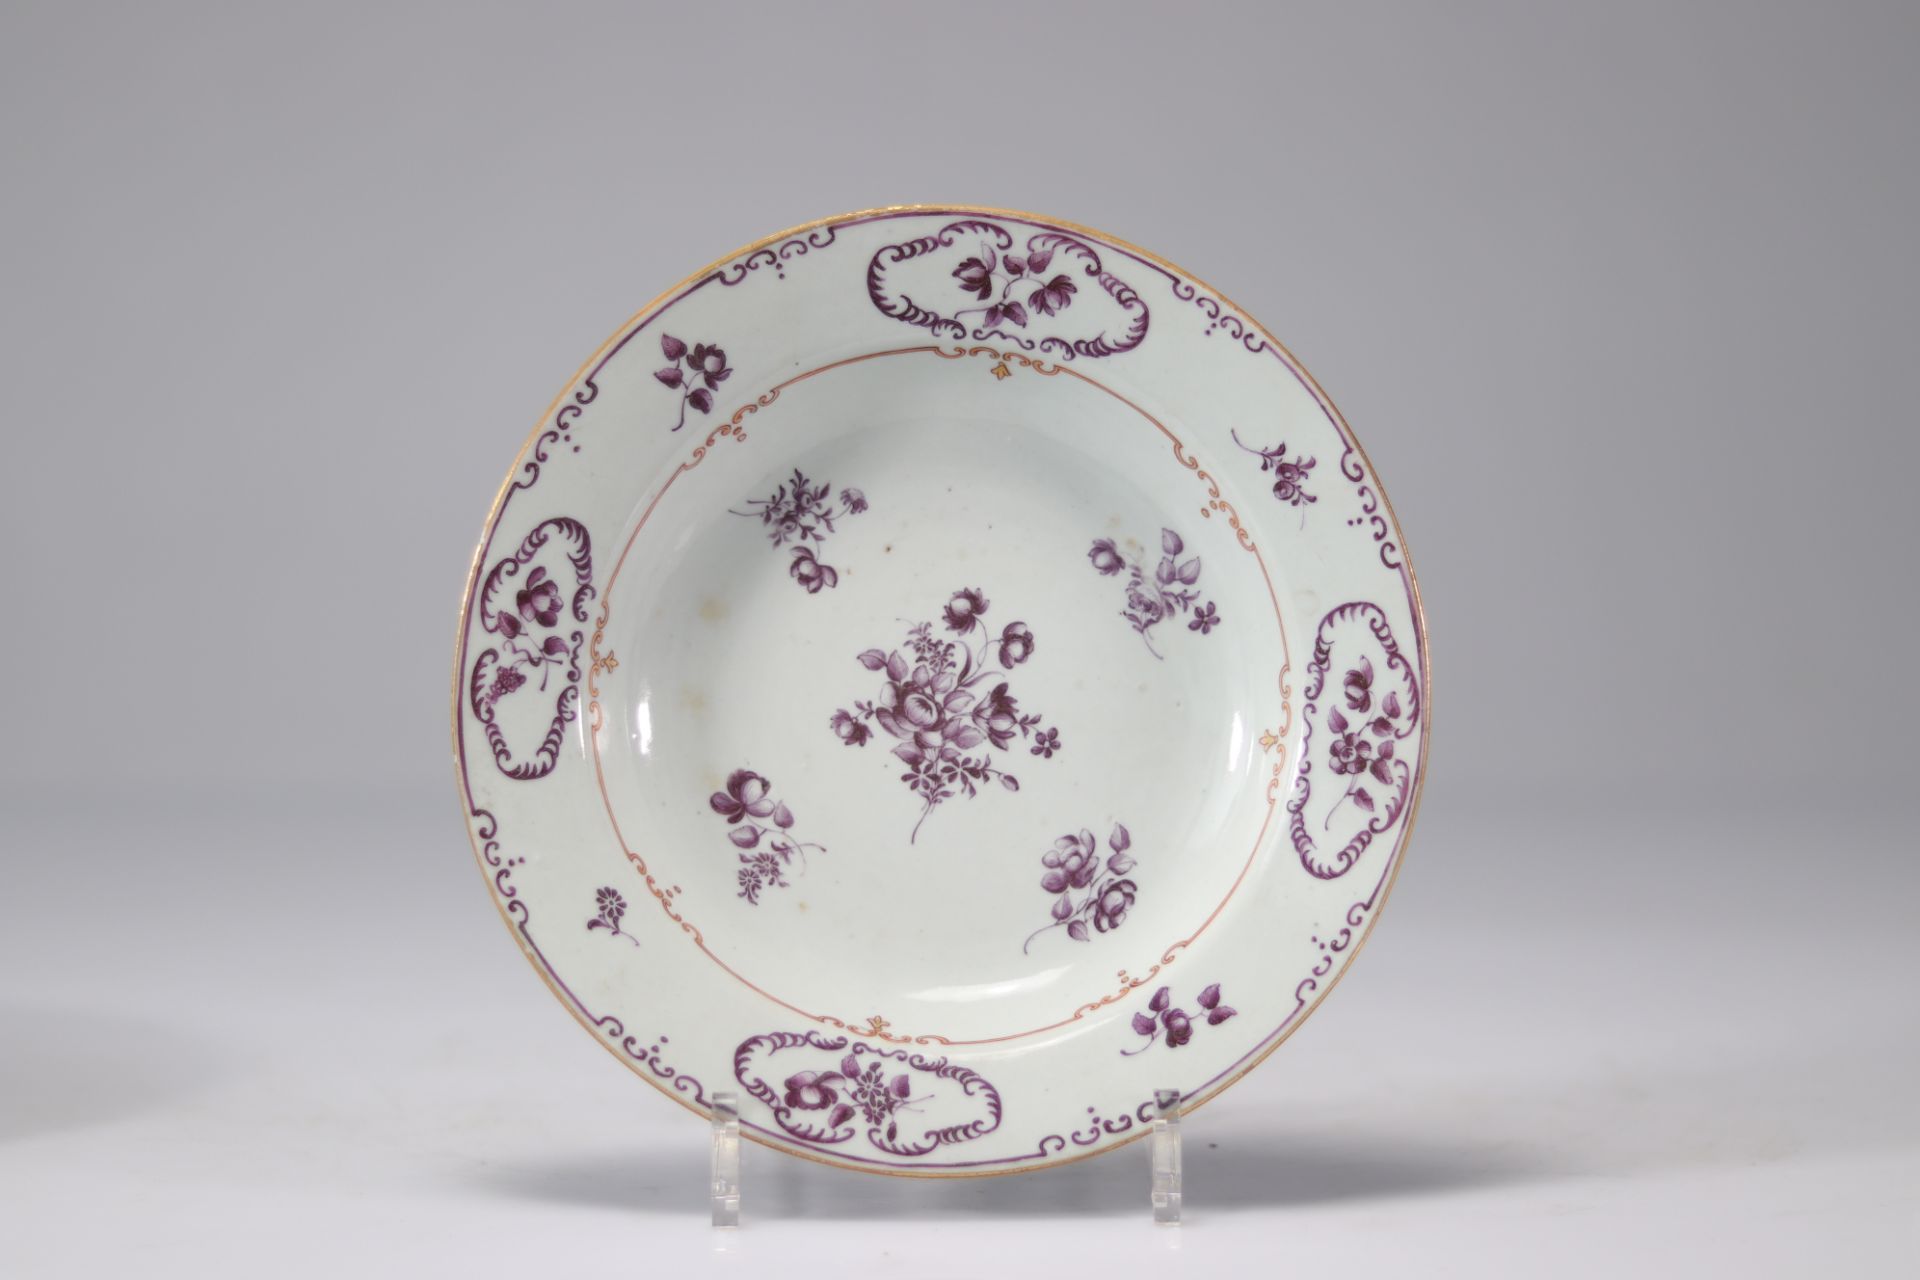 Plates (4) in Chinese porcelain Compagnie des Indes - Image 4 of 6